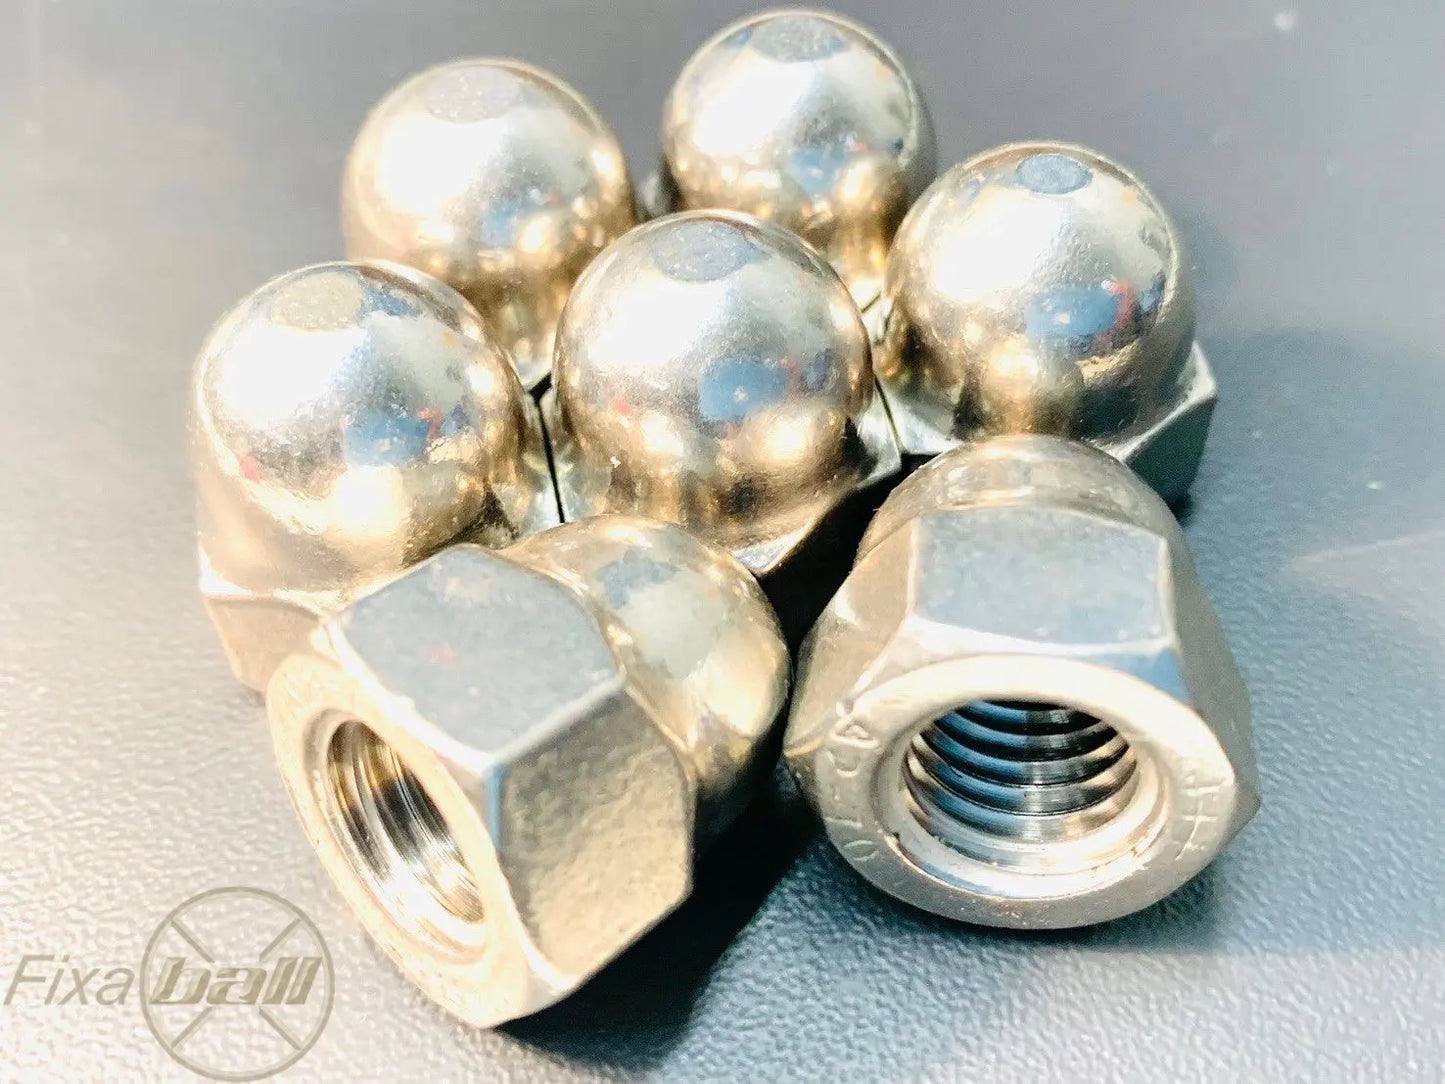 M3 - M24 Dome Nuts High Type A2 304 Stainless Steel DIN 1587Fixaball Ltd. Fixings and Fasteners UK